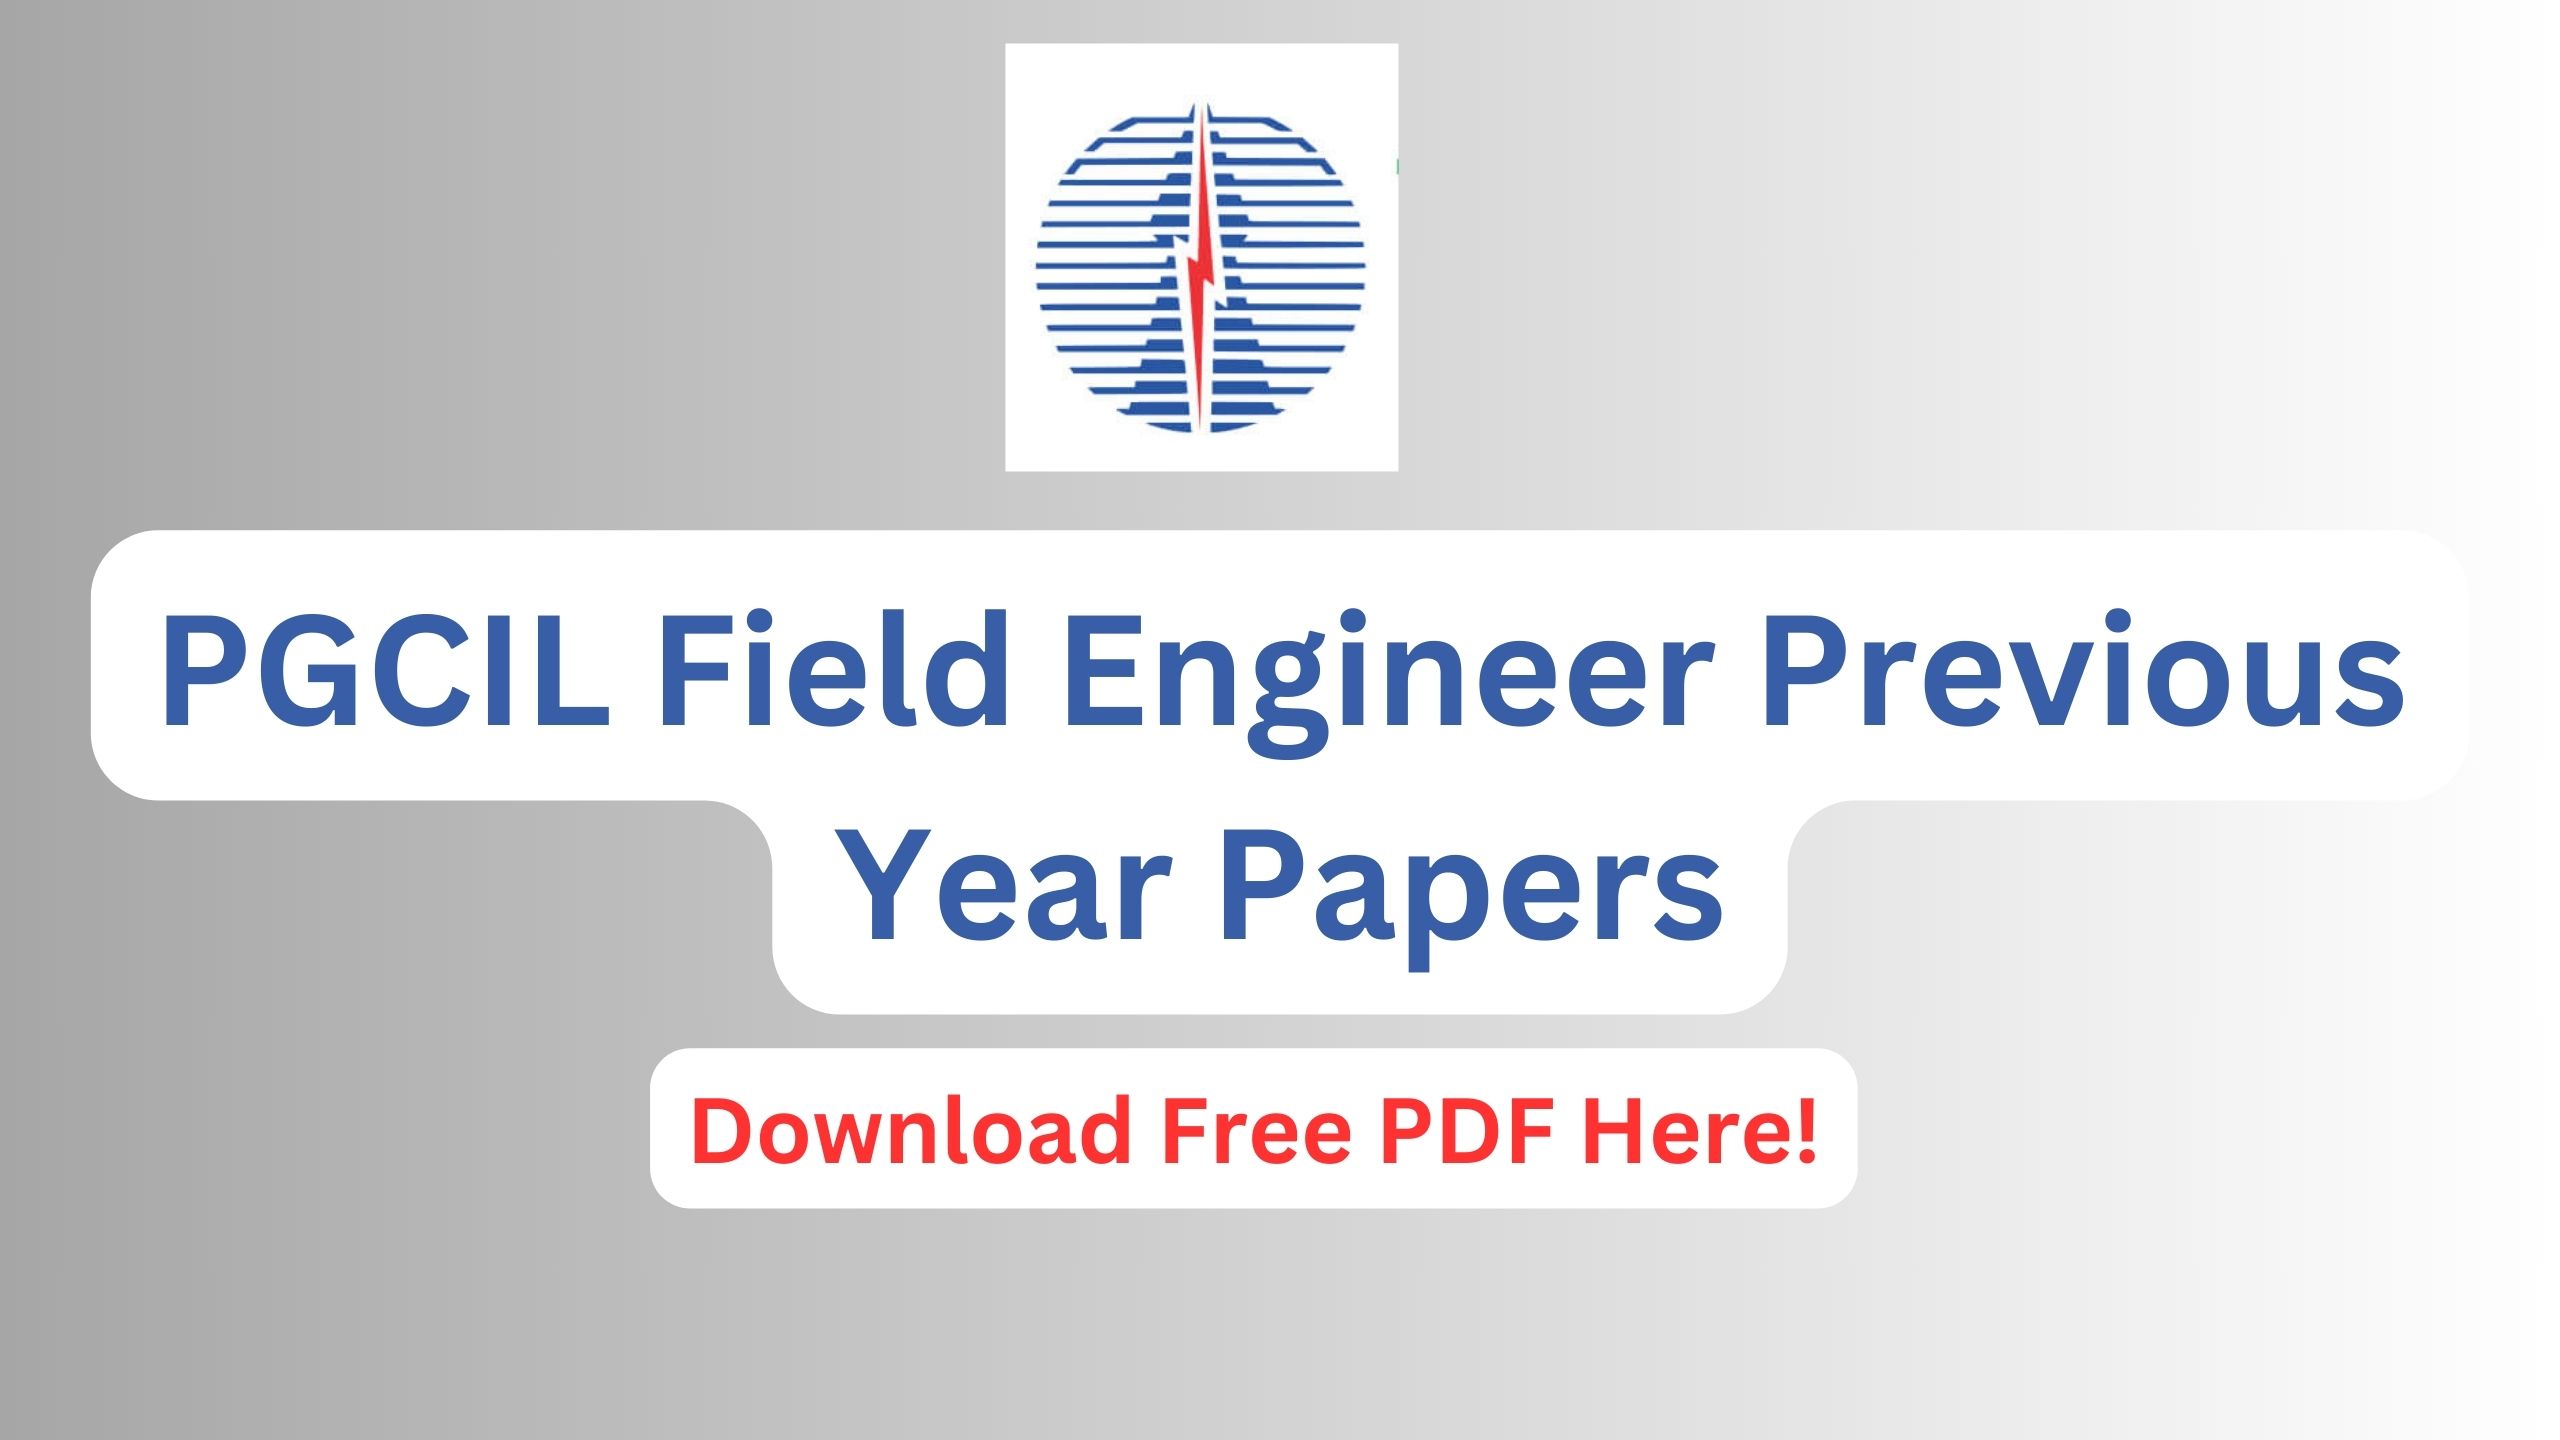 PGCIL Field Engineer Previous Year Papers